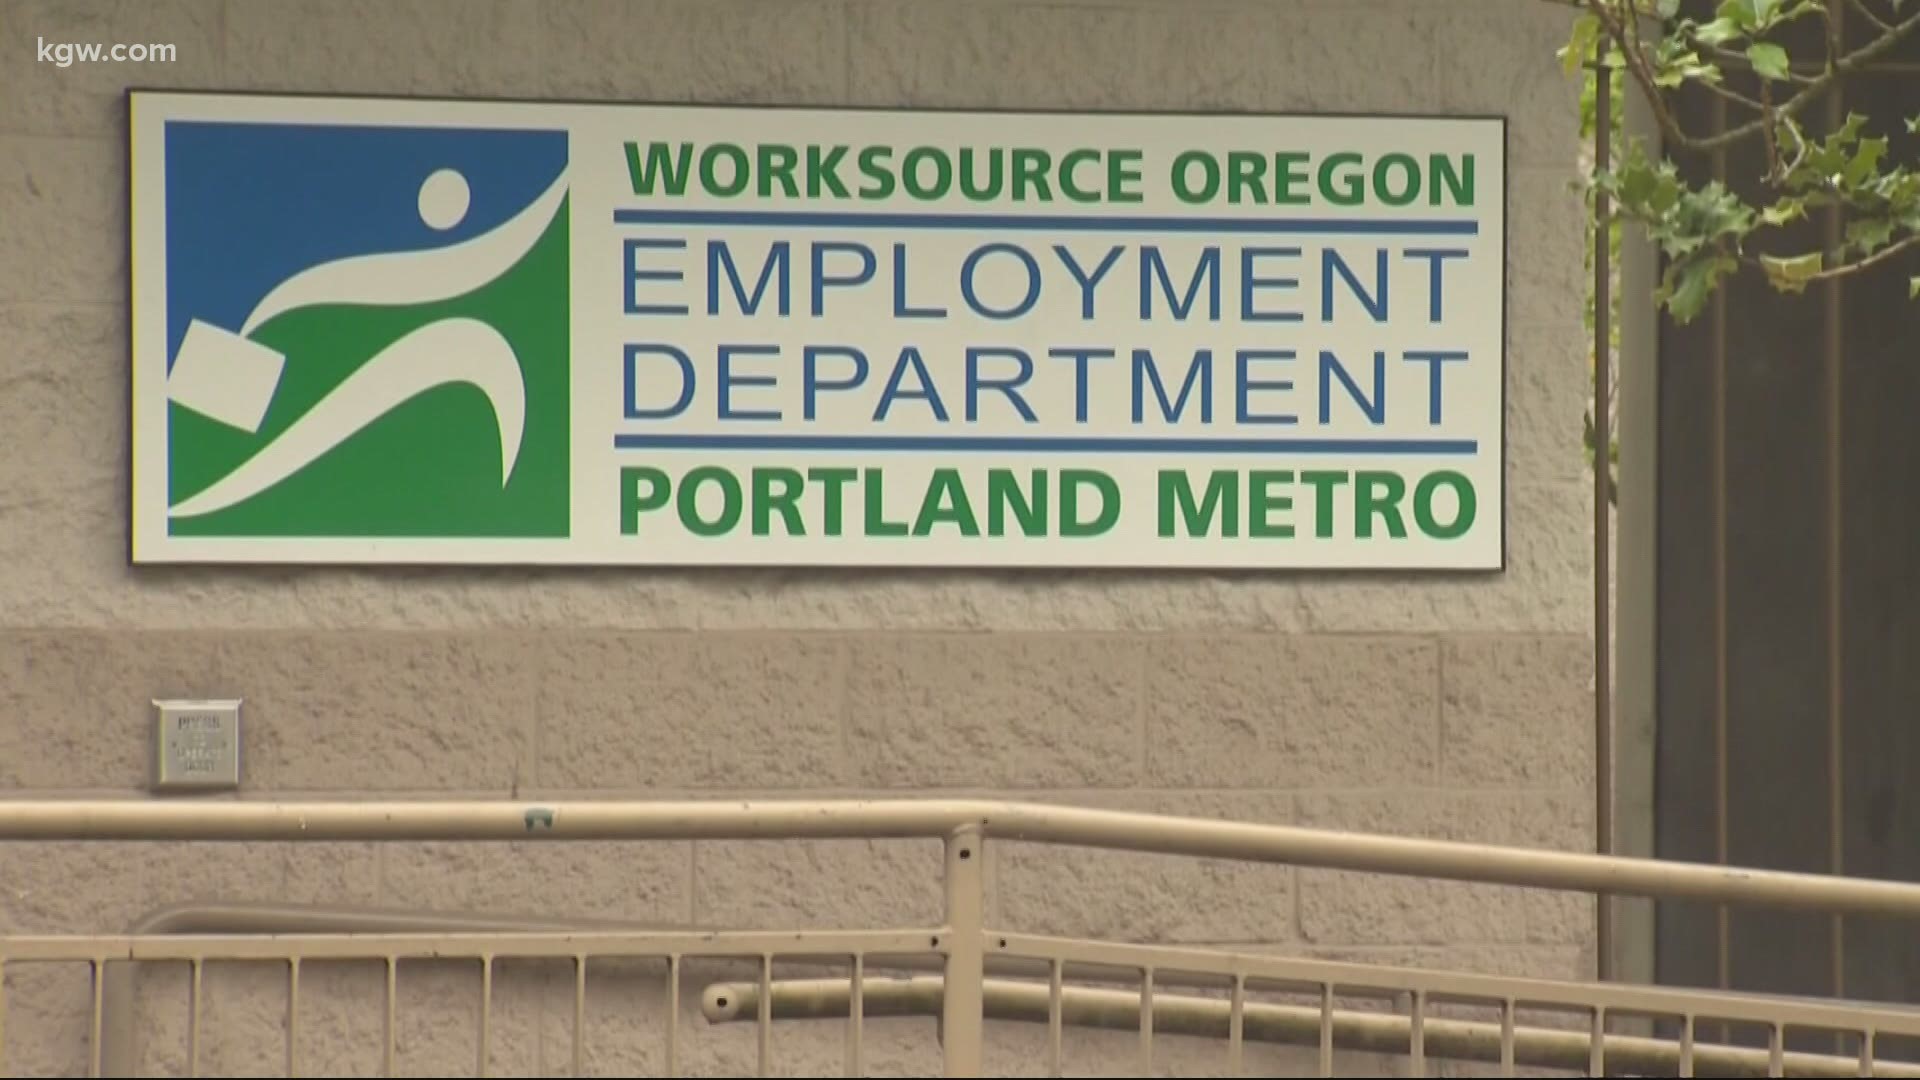 Two months after President Trump authorized new relief payments, some Oregonians are still waiting on that extra $300 check. Devon Haskins reports.